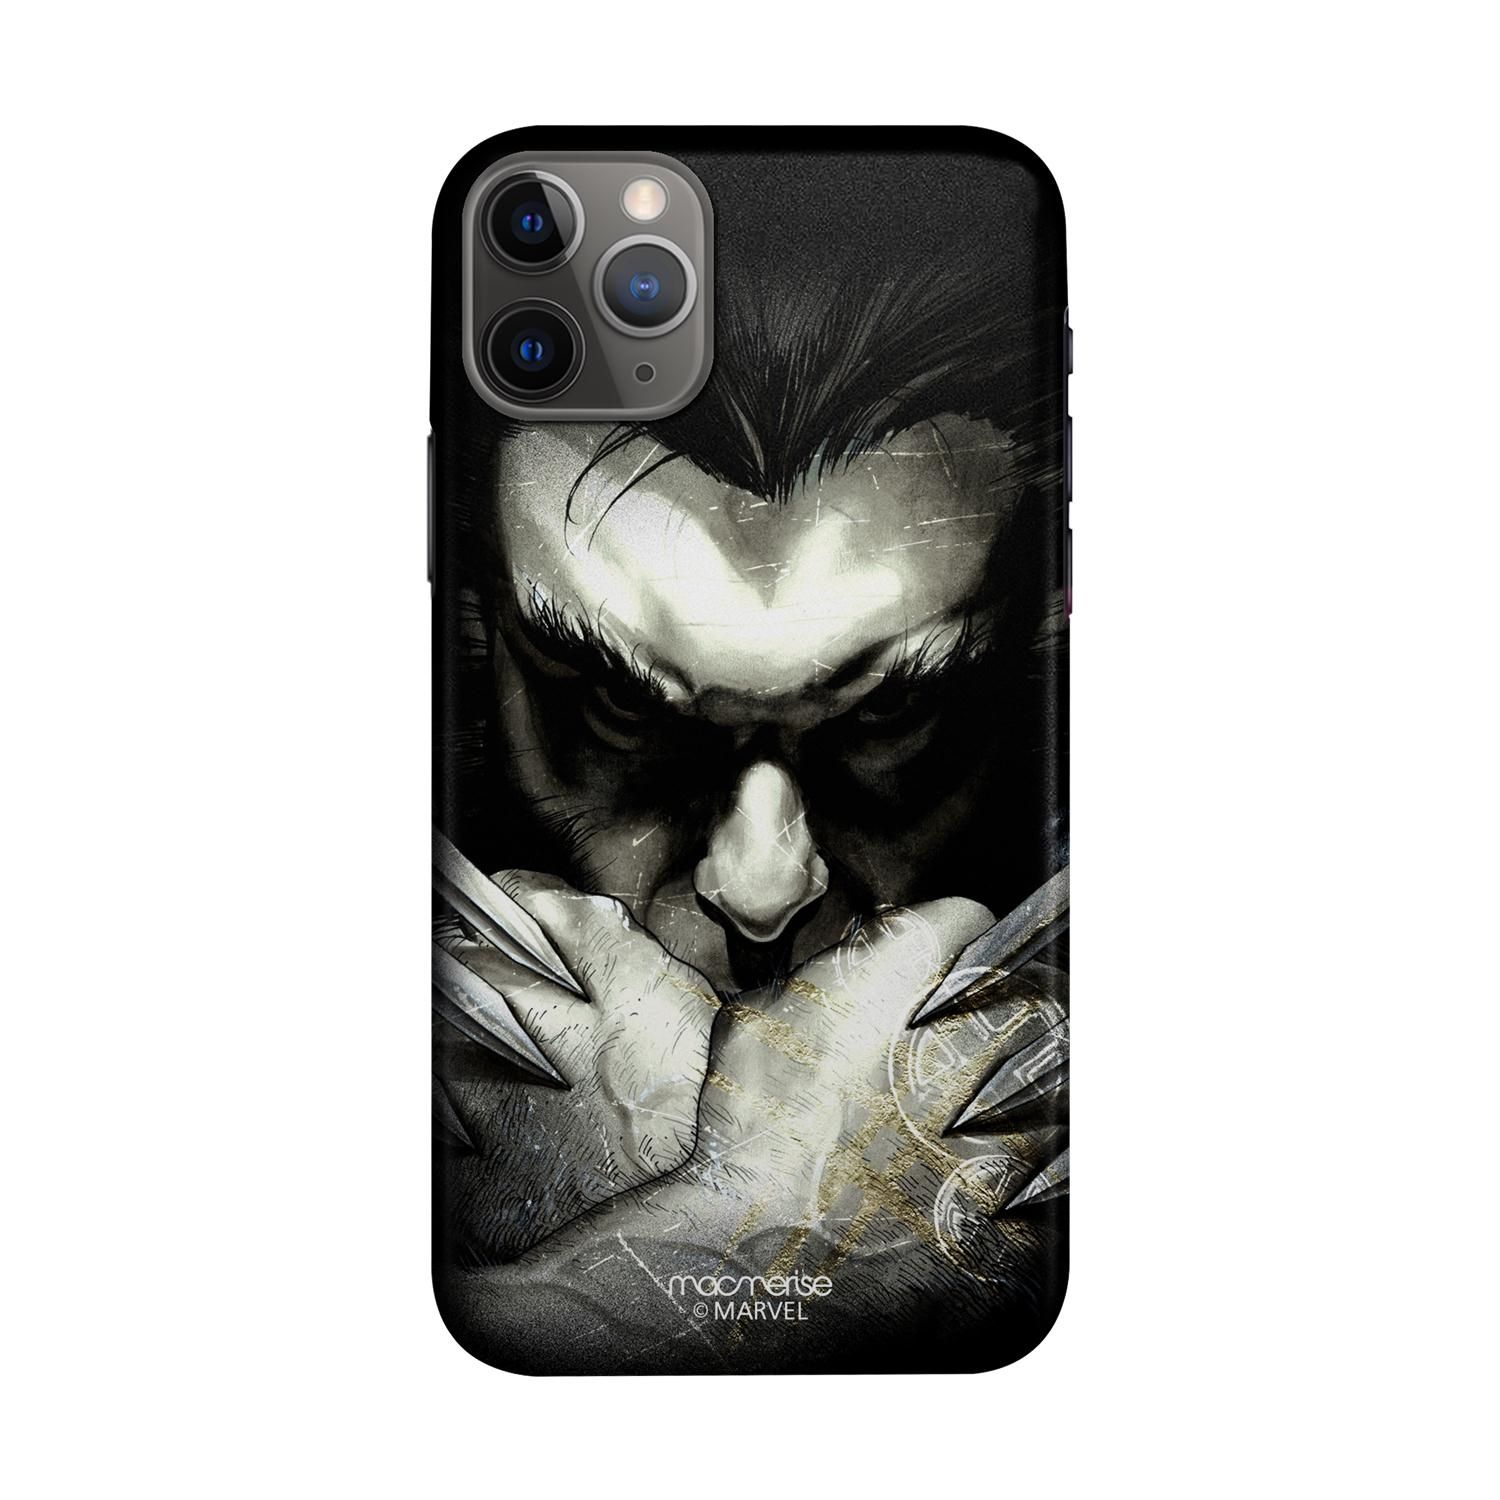 Buy The Dark Claws - Sleek Phone Case for iPhone 11 Pro Online